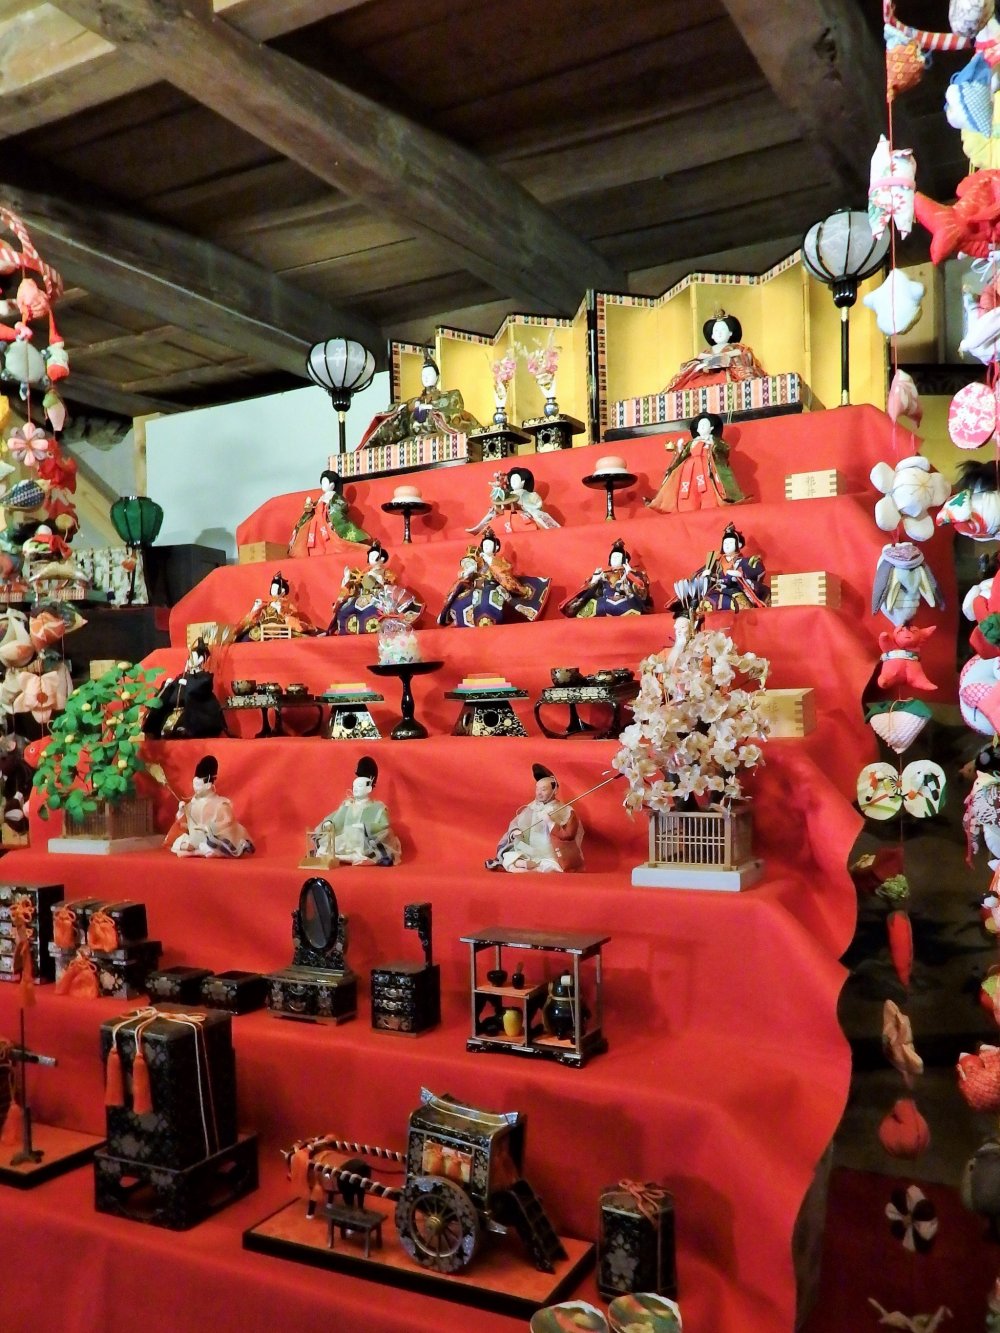 For the entire month of February, view traditional&nbsp;hina doll displays like this one. There are also many creative non-traditional displays to enjoy.